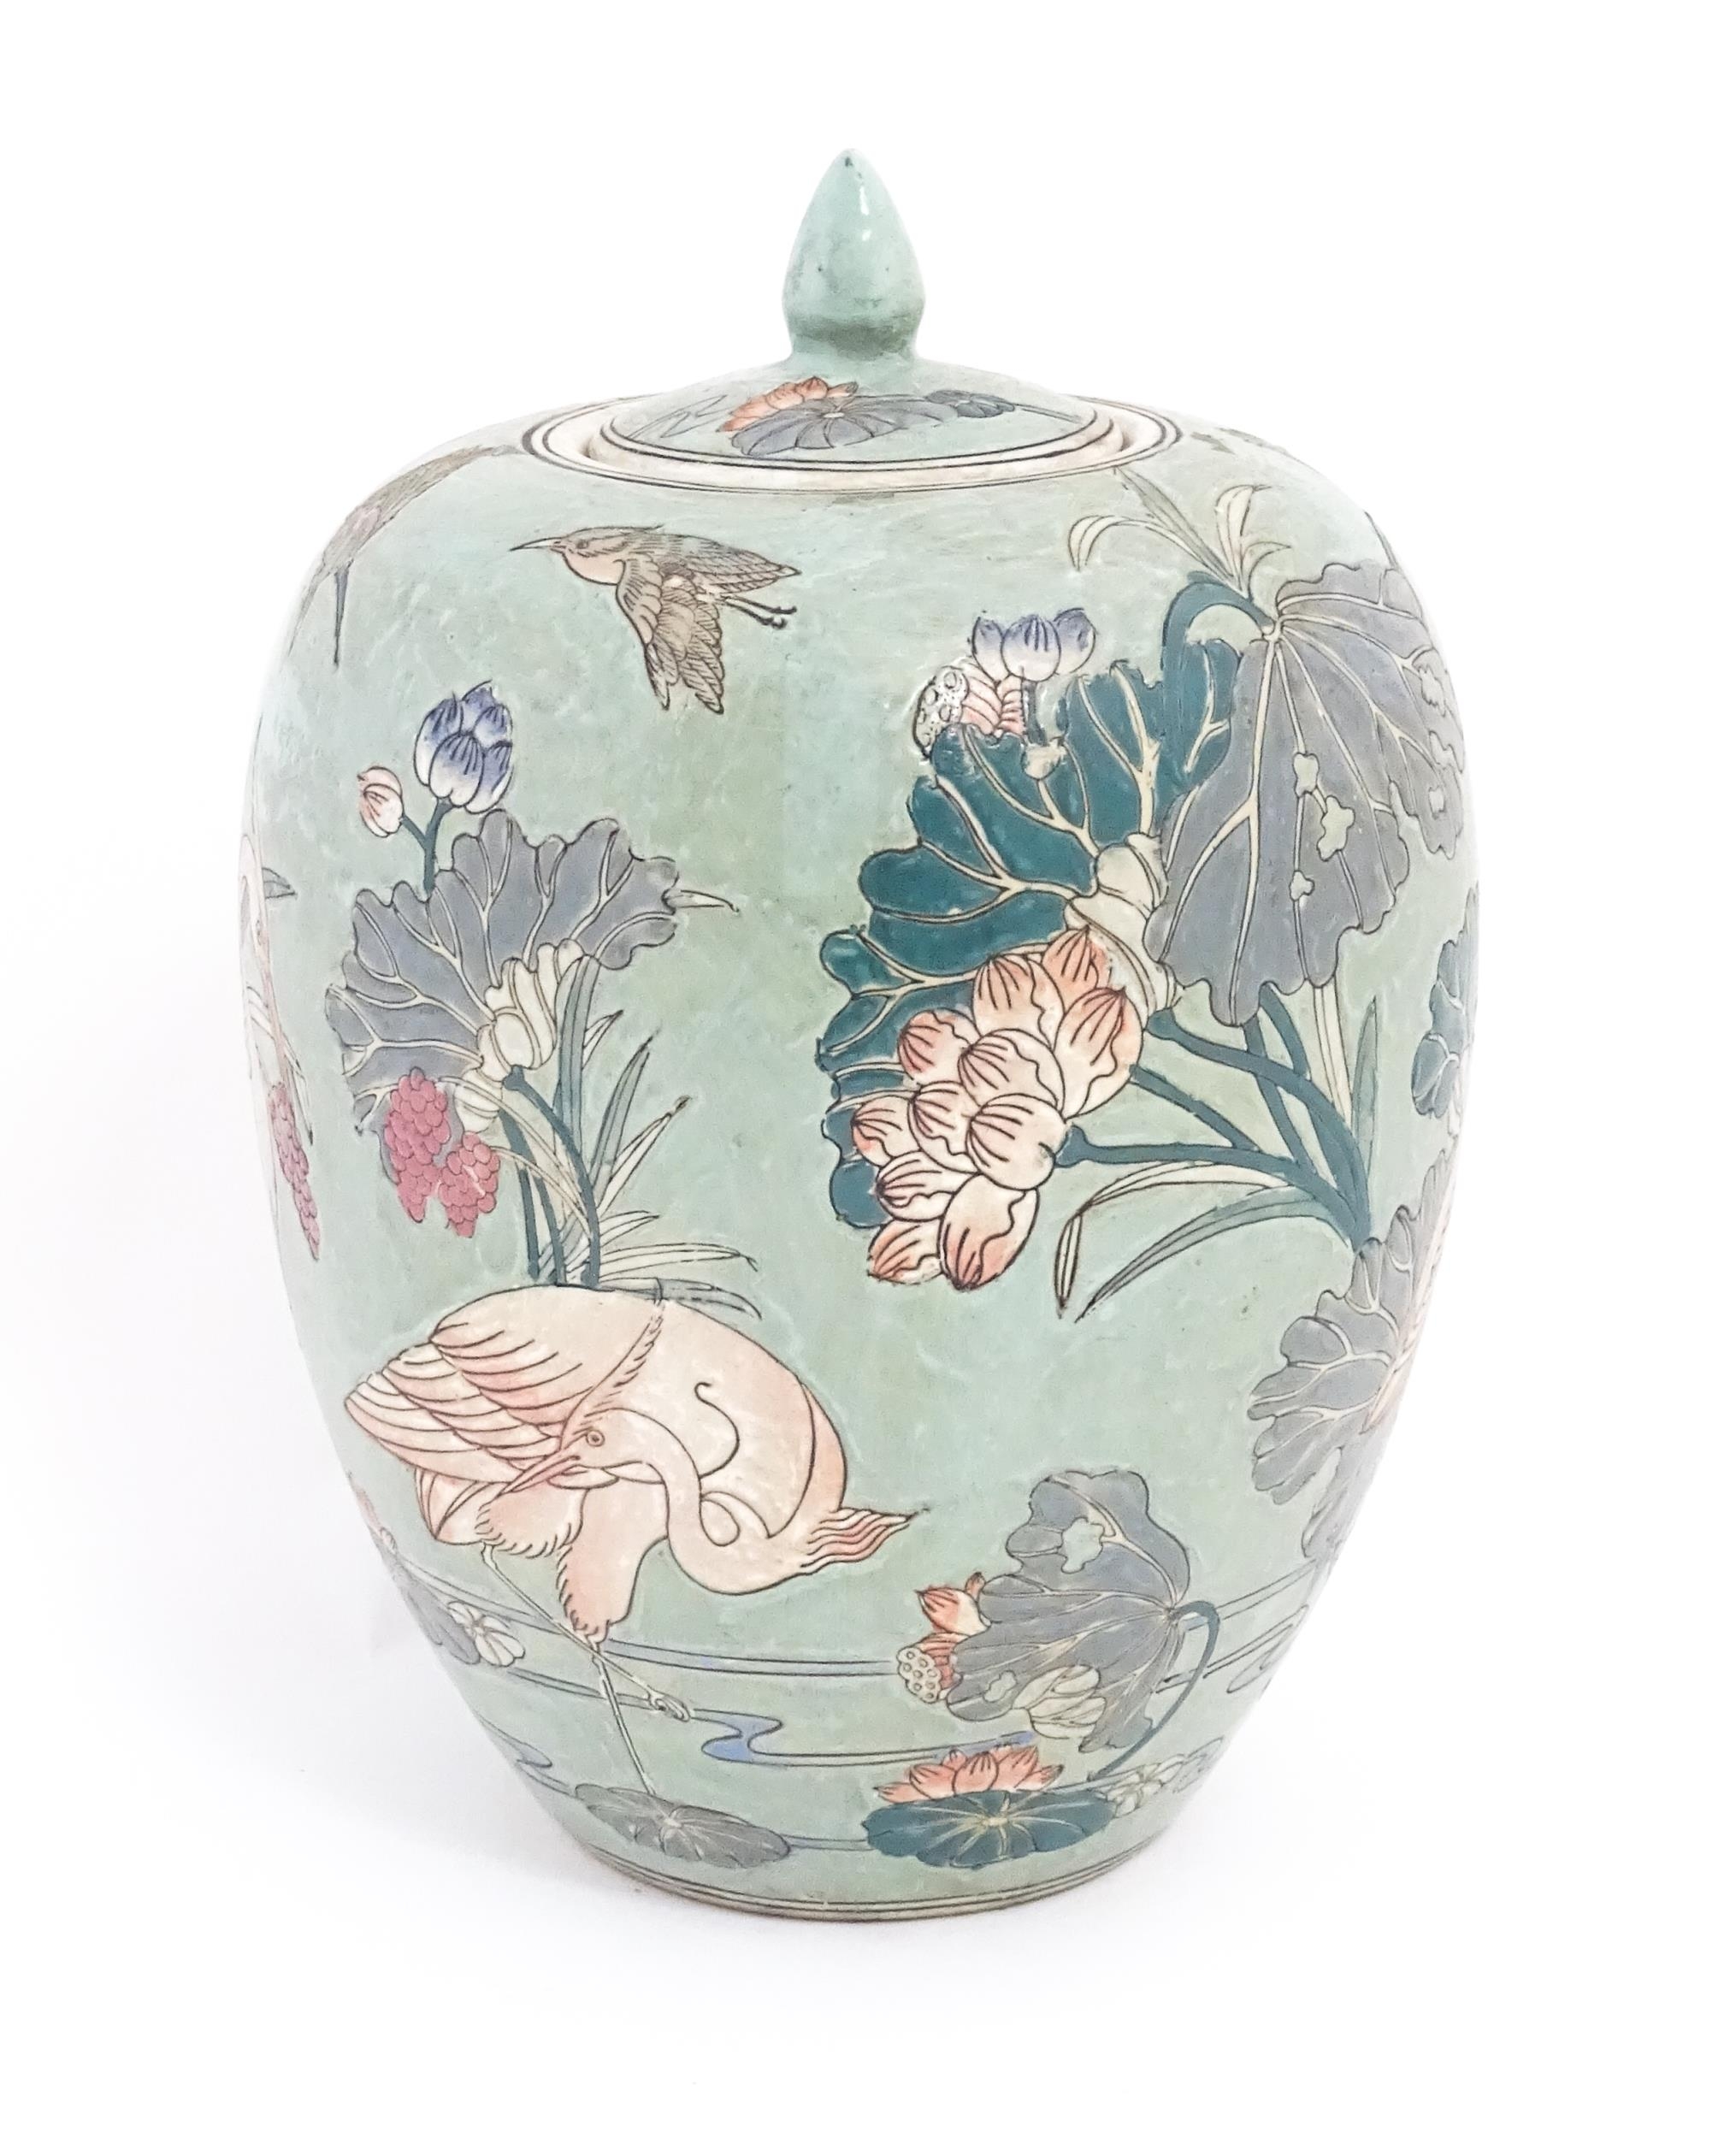 A Chinese ginger jar with celadon style glaze decorated with crane birds, flowers, lily pads, etc. - Image 3 of 8